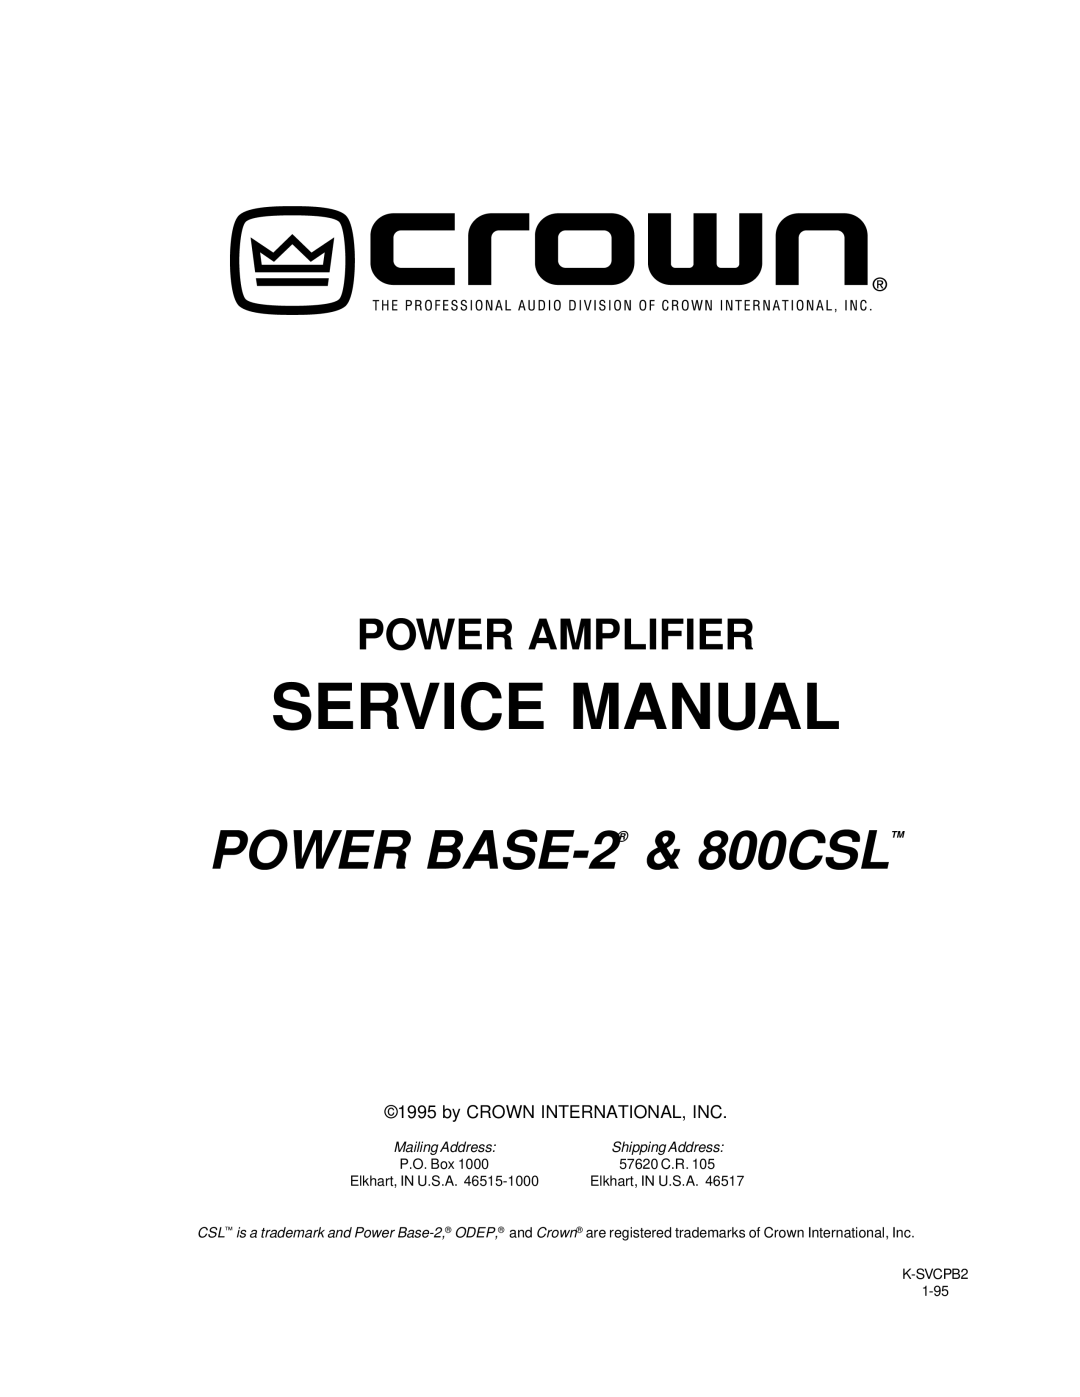 Crown Audio service manual POWER BASE-2 & 800CSL, Power Amplifier, Elkhart, IN U.S.A, K-SVCPB2, Mailing Address 